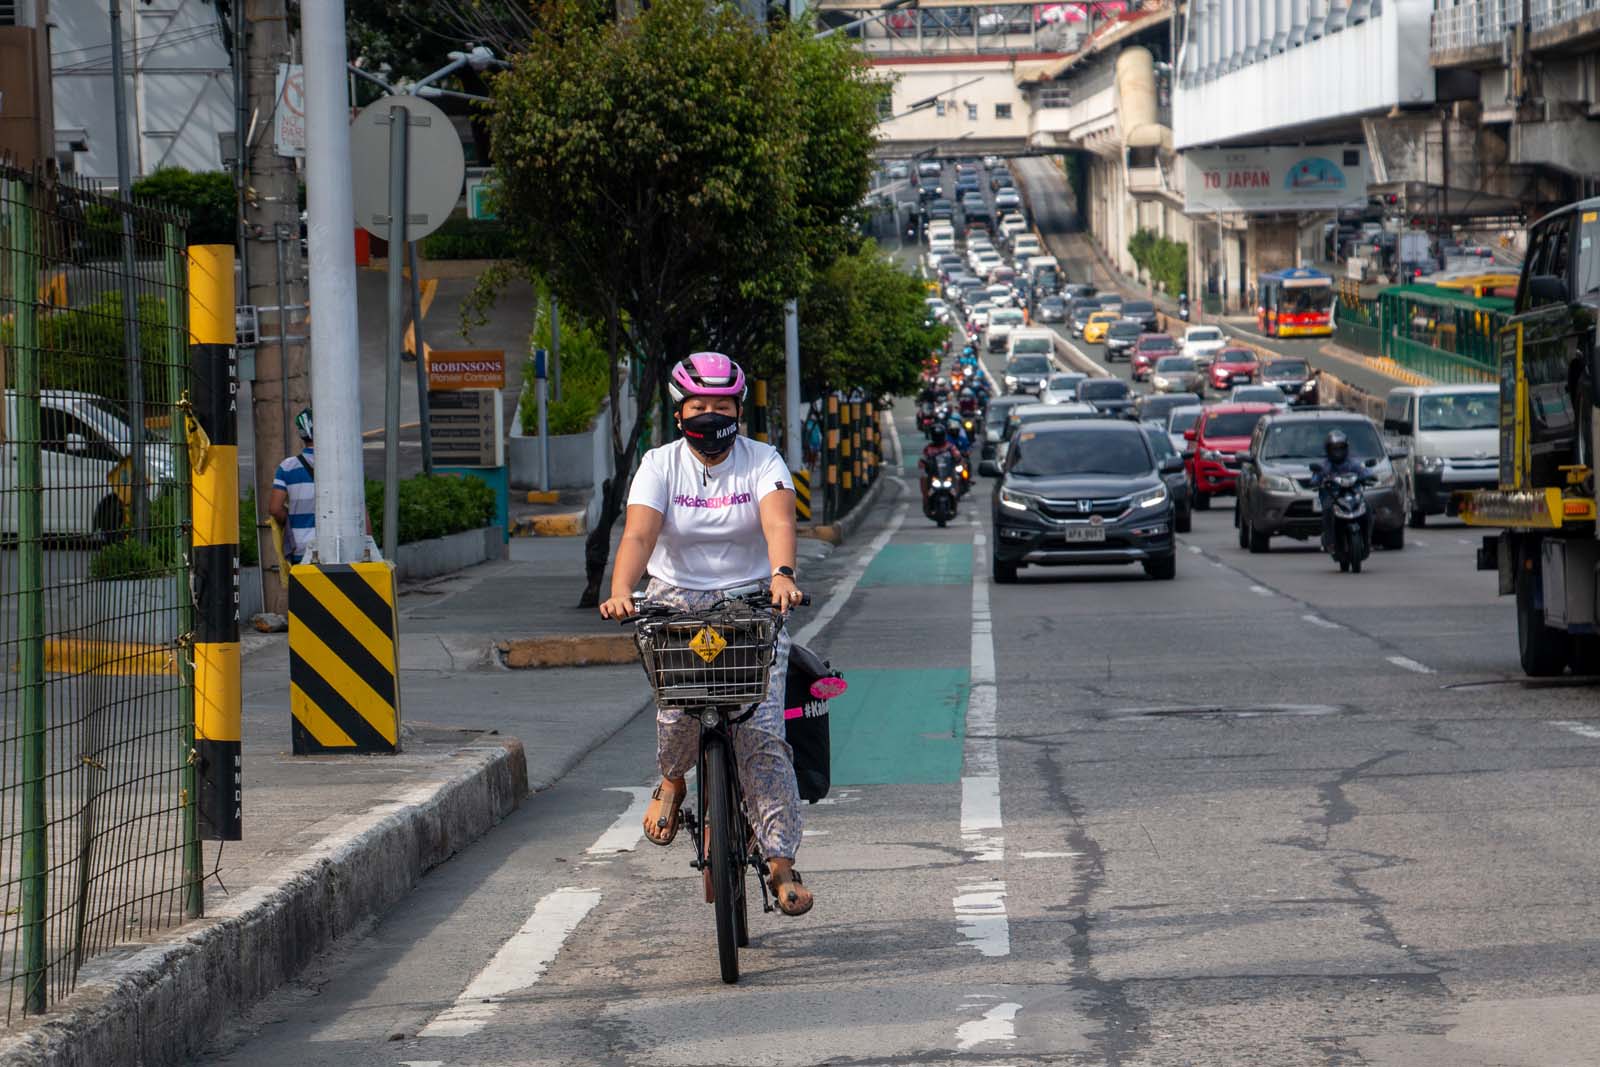 When using her bicycle as her primary mode of transport, Jaramia Amarnani, 41, braves unfriendly drivers and near-absent bike lanes in Metro Manila, Philippines. Photo by Jhesset O. Enano